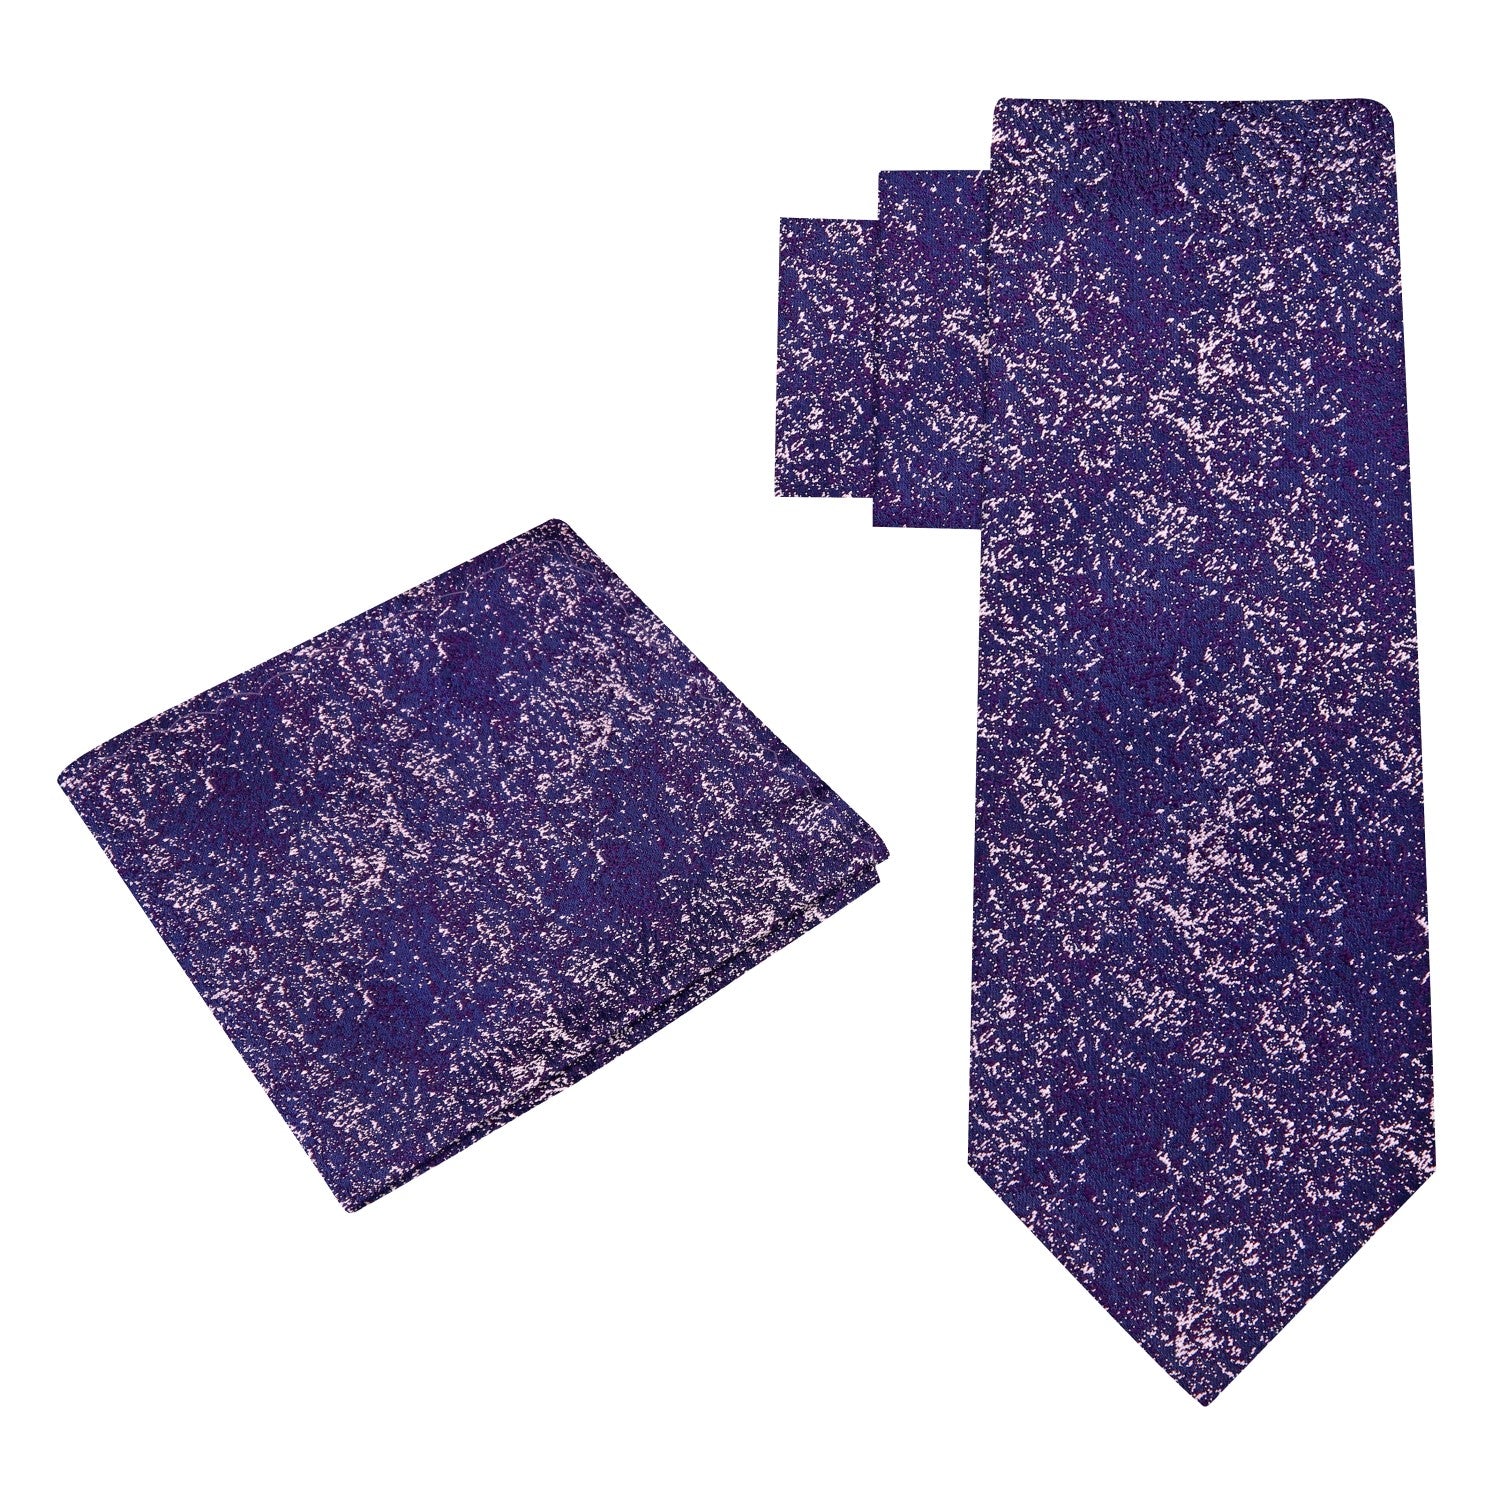 Alt View: A Fusion Purple, Persian Violet, Light Sand Color Abstract Textured Pattern Silk Tie, Pocket Square